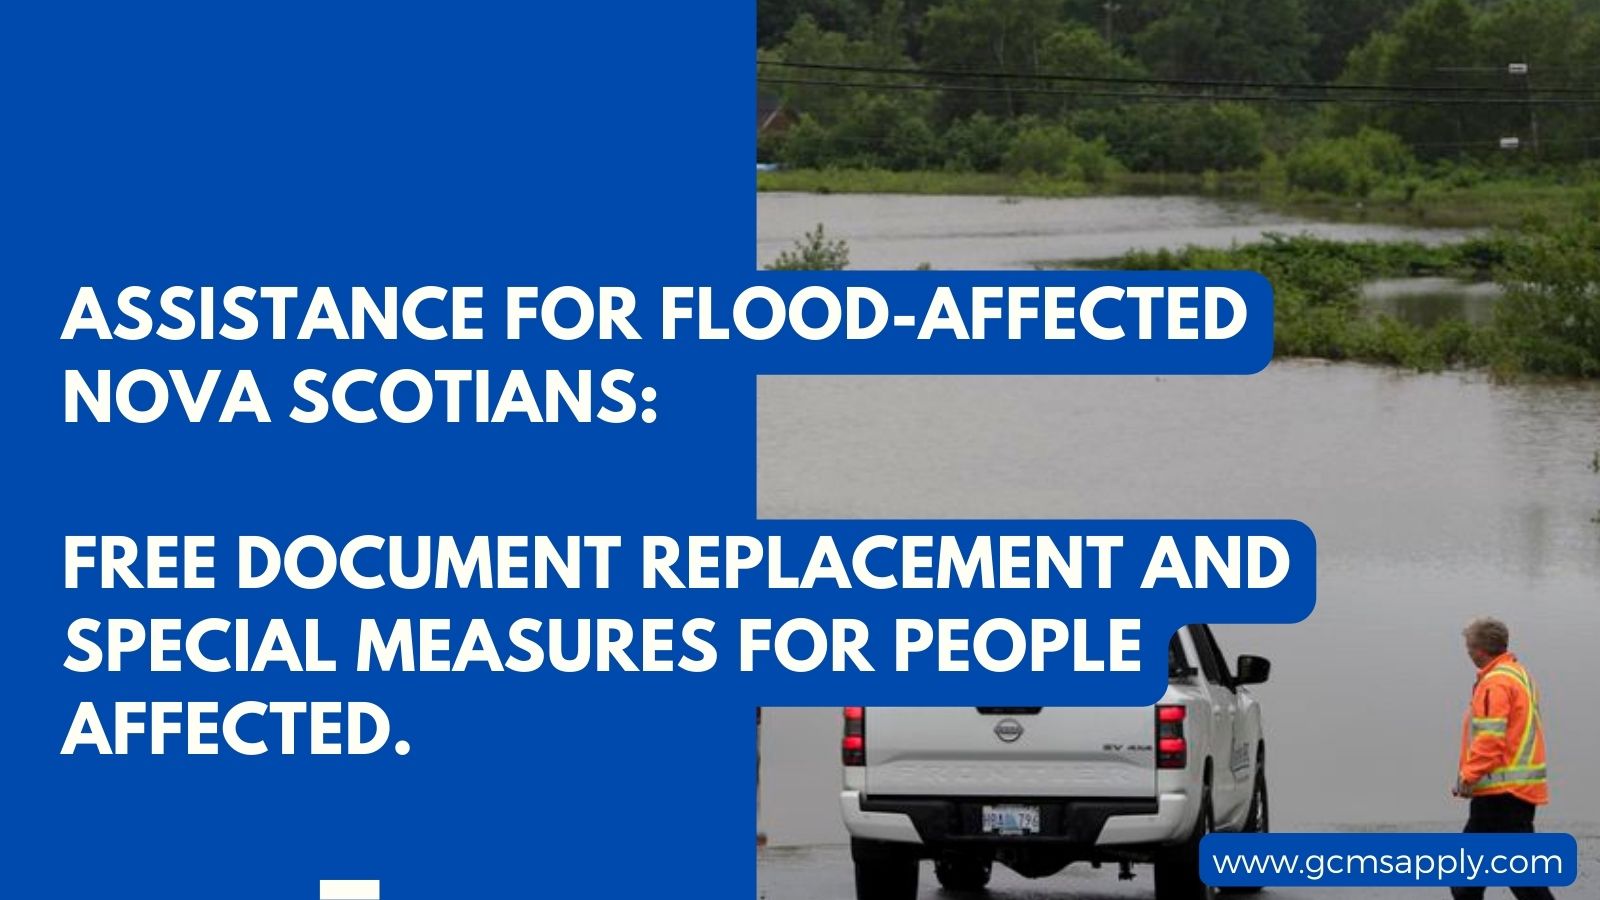 Assistance for Flood-Affected Nova Scotians Free Document Replacement and Special Measures for People Affected.